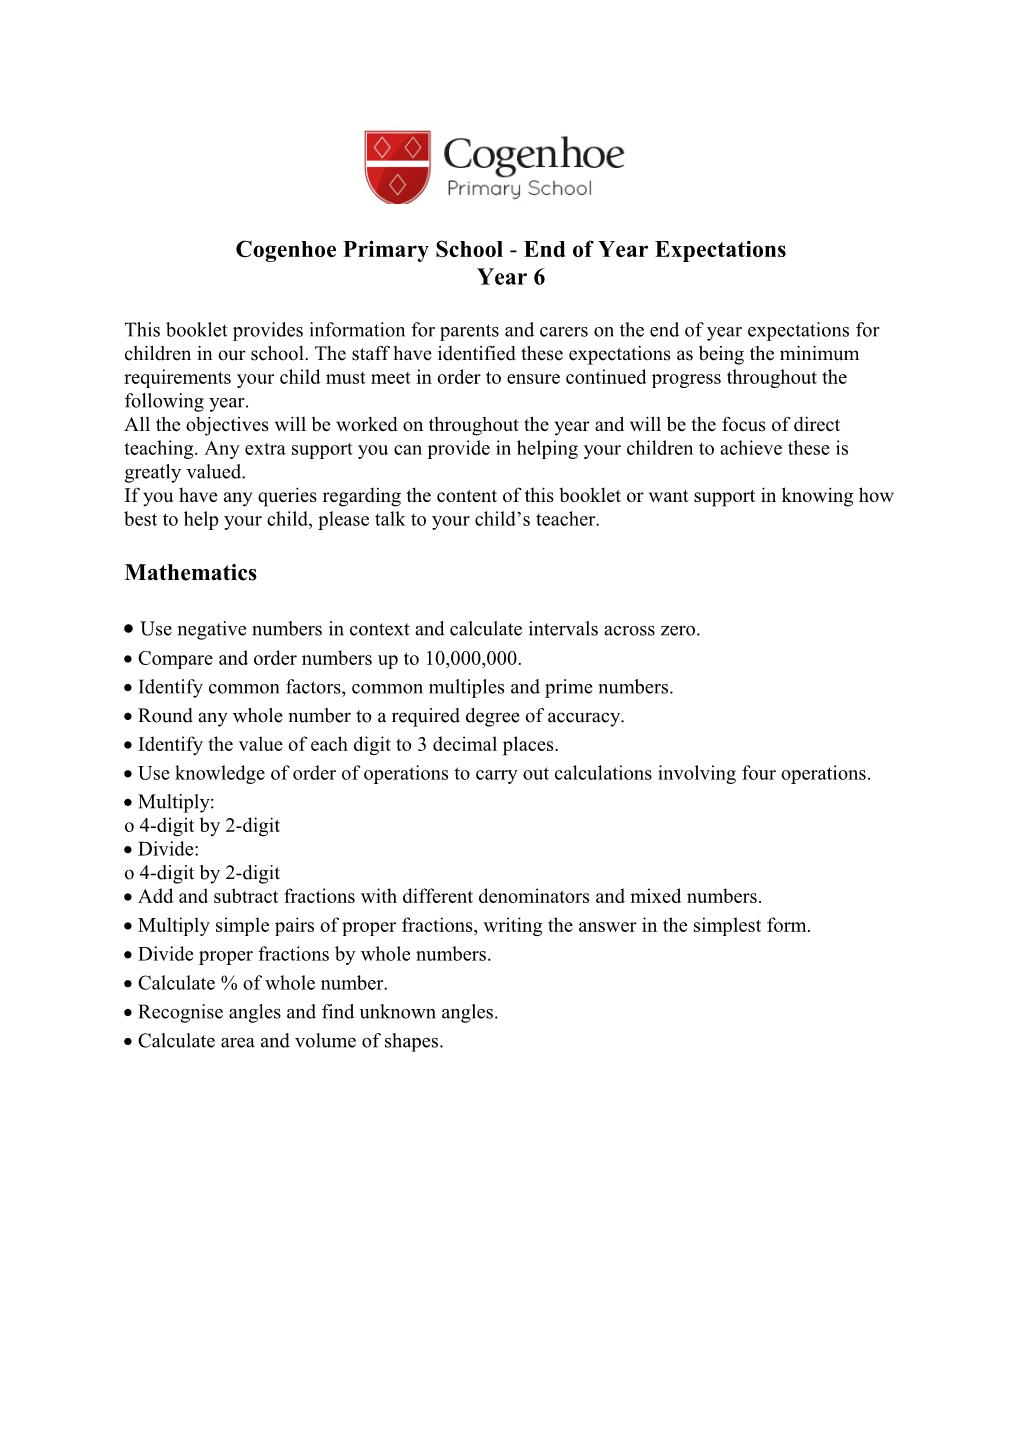 Cogenhoe Primary School - End of Year Expectations